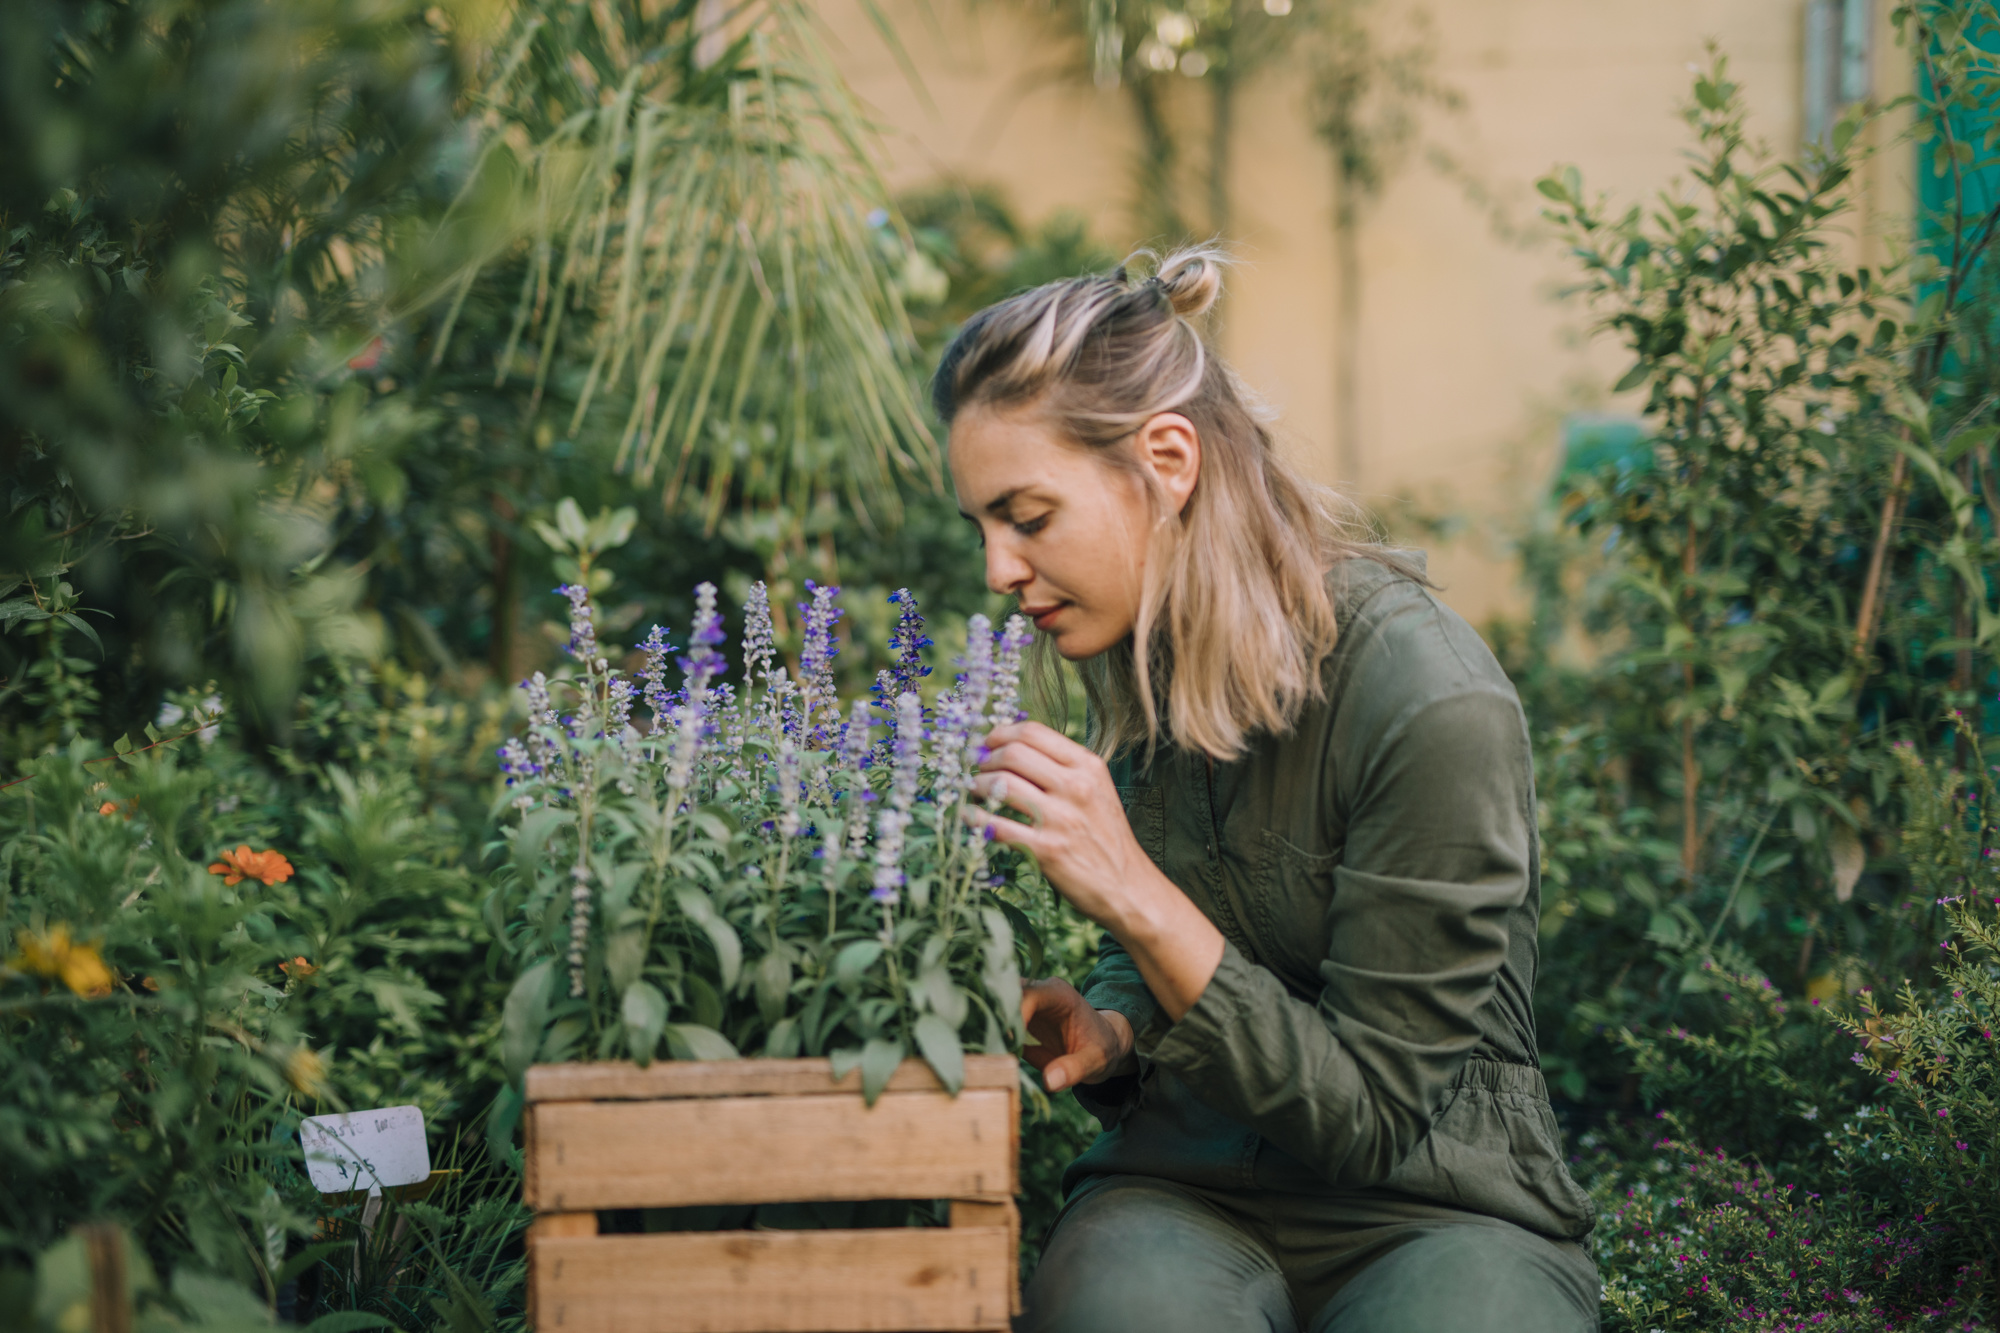 Planting Lavender: A Step-By-Step Guide To Growing